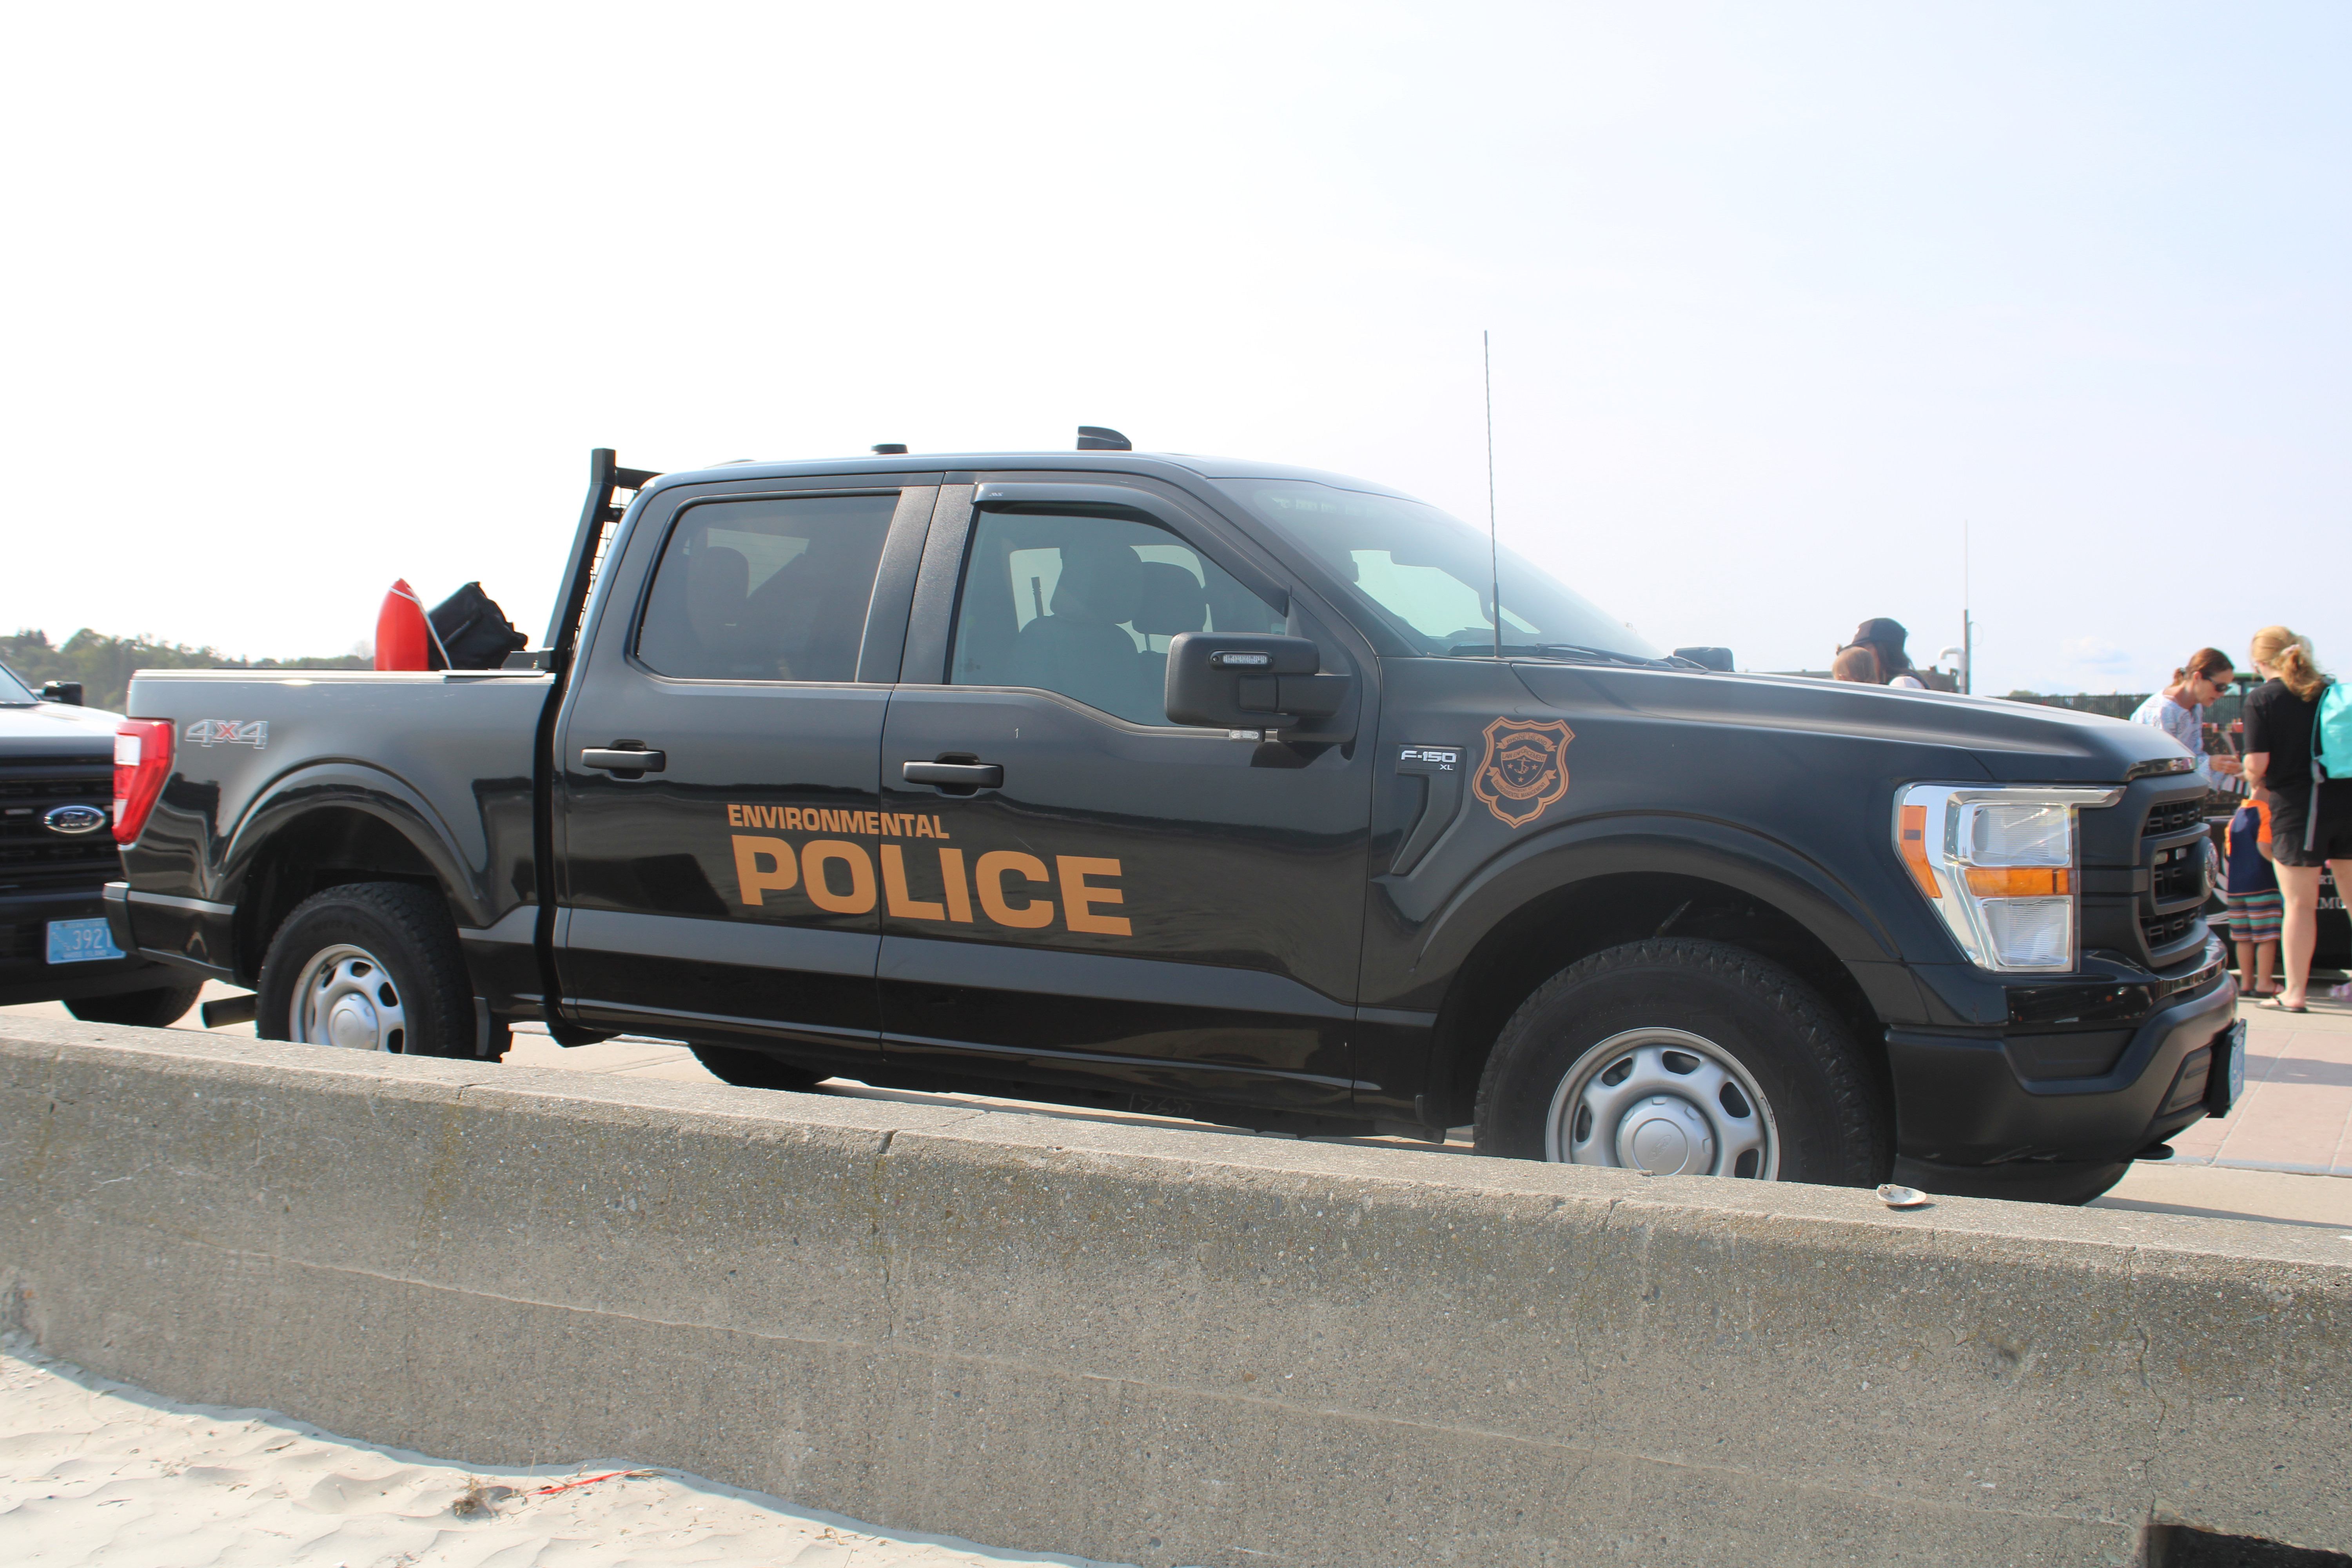 A photo  of Rhode Island Environmental Police
            Cruiser 2403, a 2021 Ford F-150 Crew Cab             taken by @riemergencyvehicles